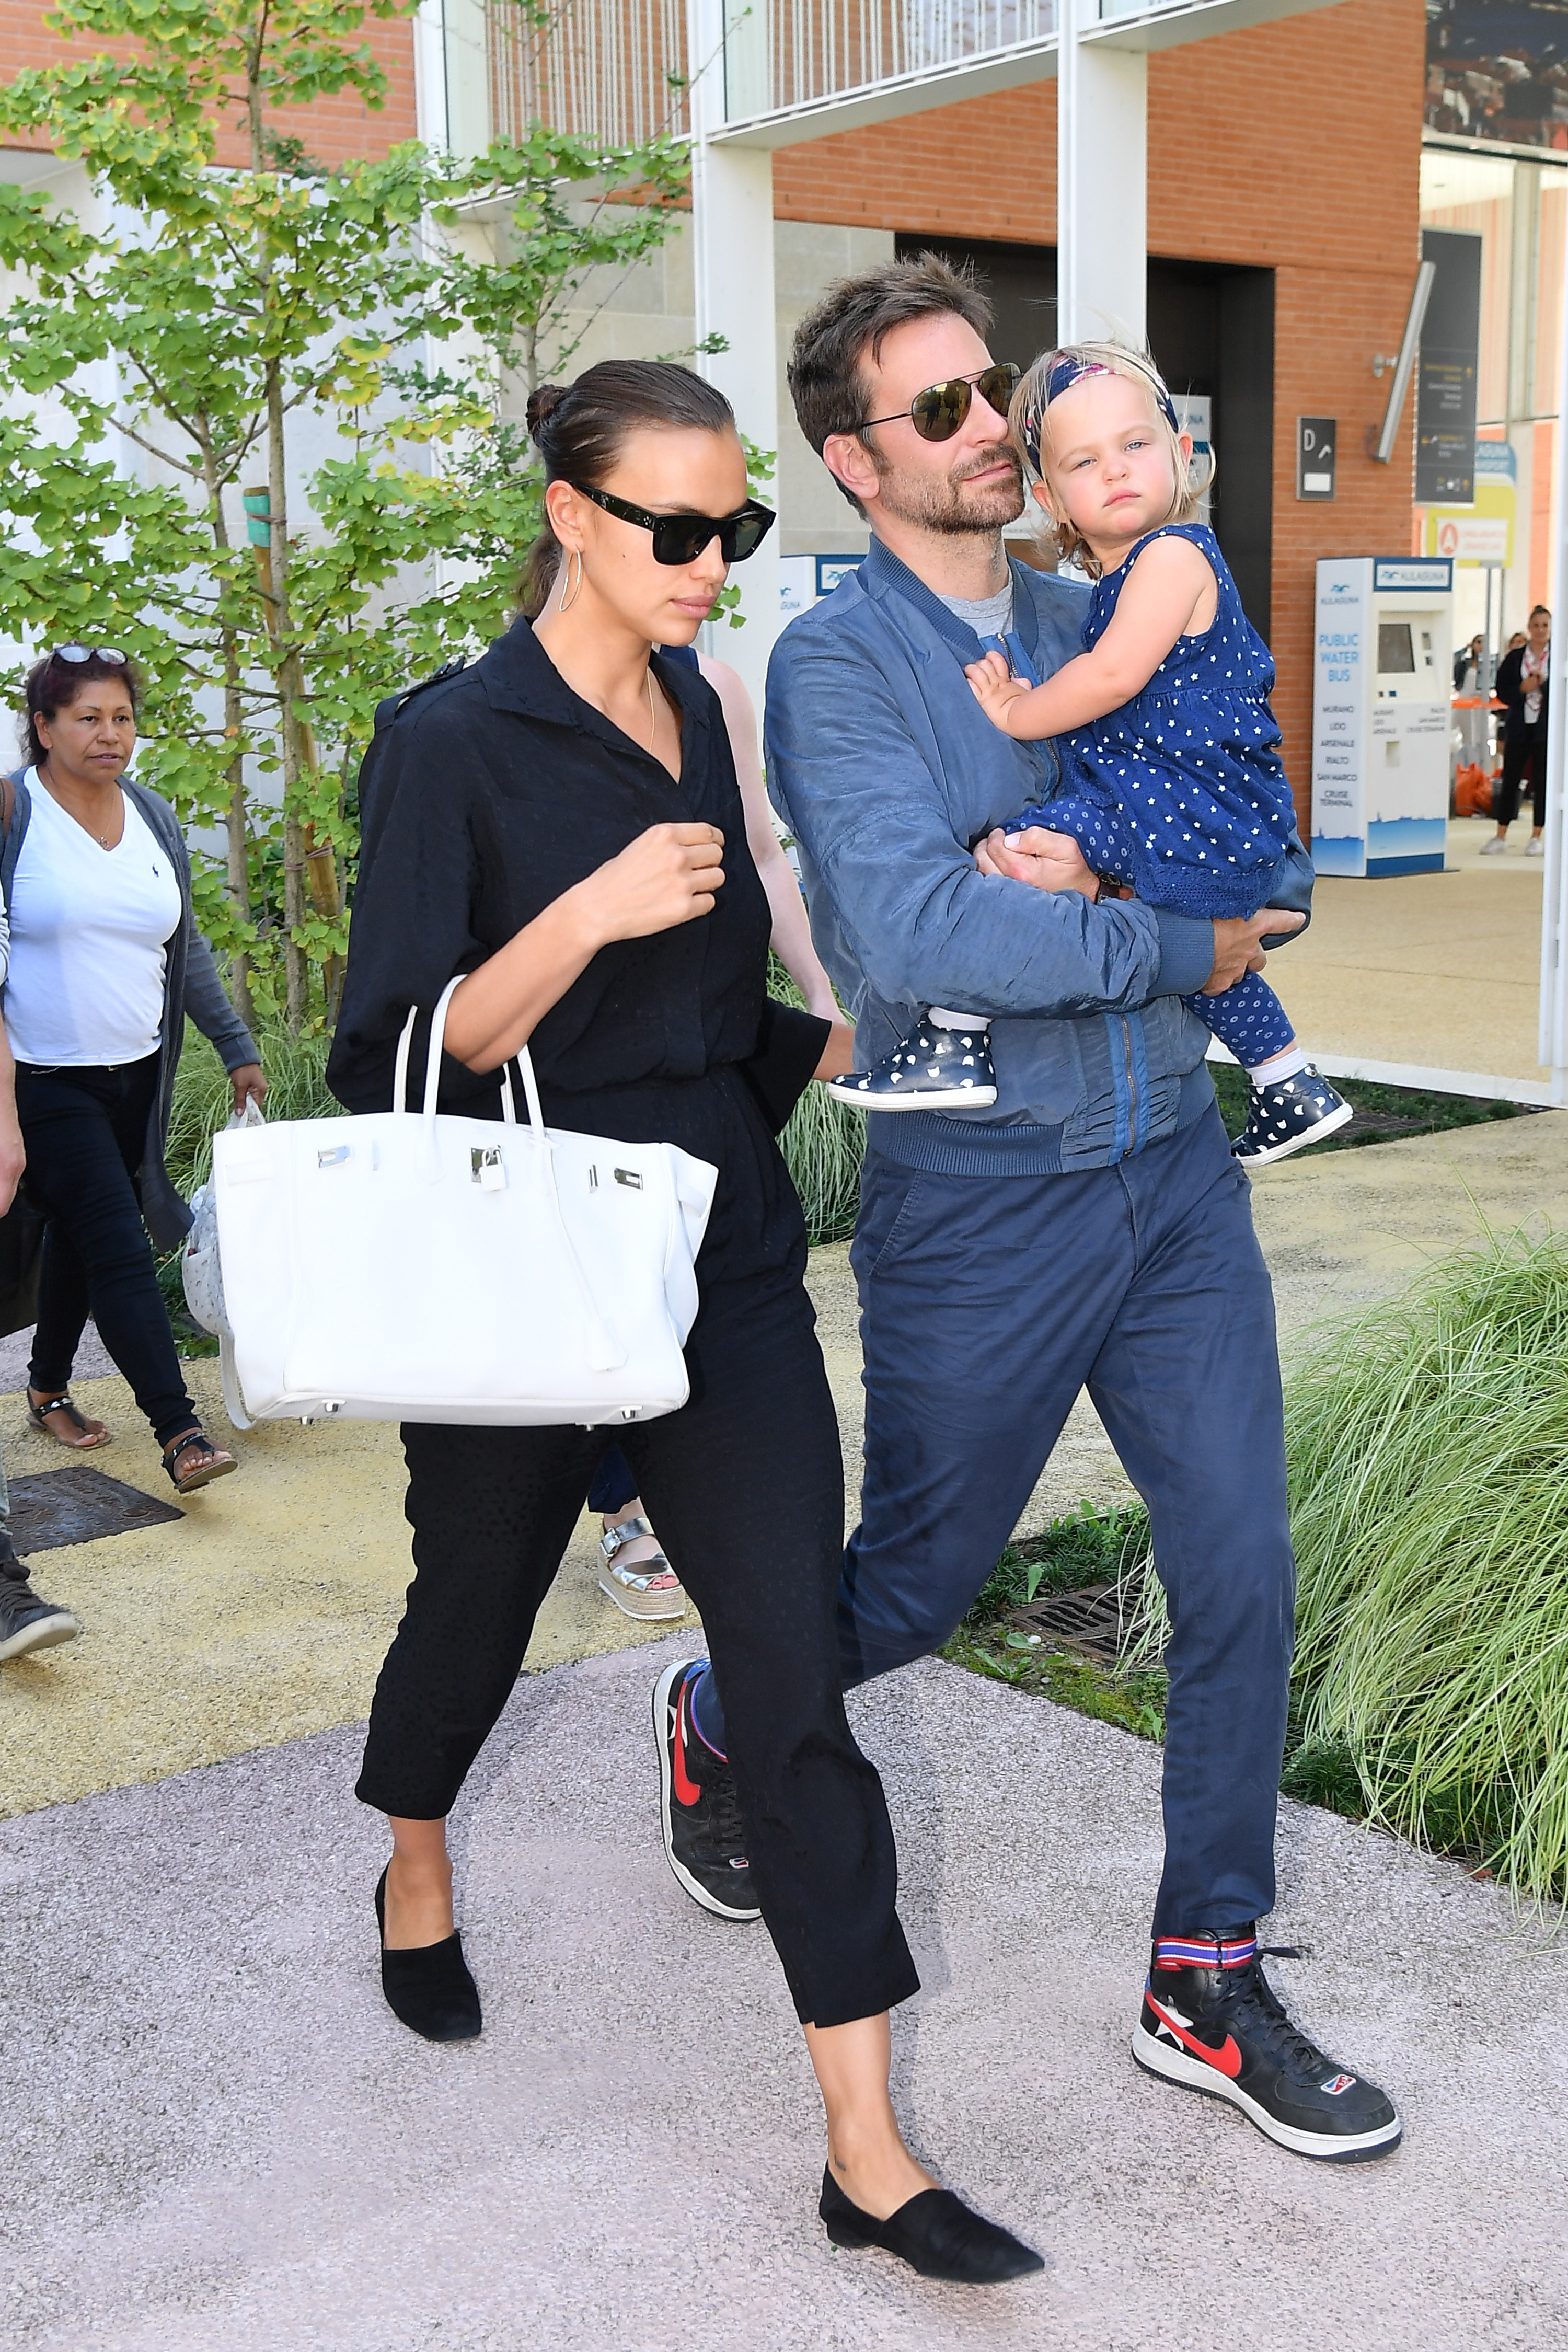 Irina Shayk, Bradley Cooper, and their daughter Lea seen arriving at the 75th Venice Film Festival on August 30, 2018, in Venice, Italy | Source: Getty Images